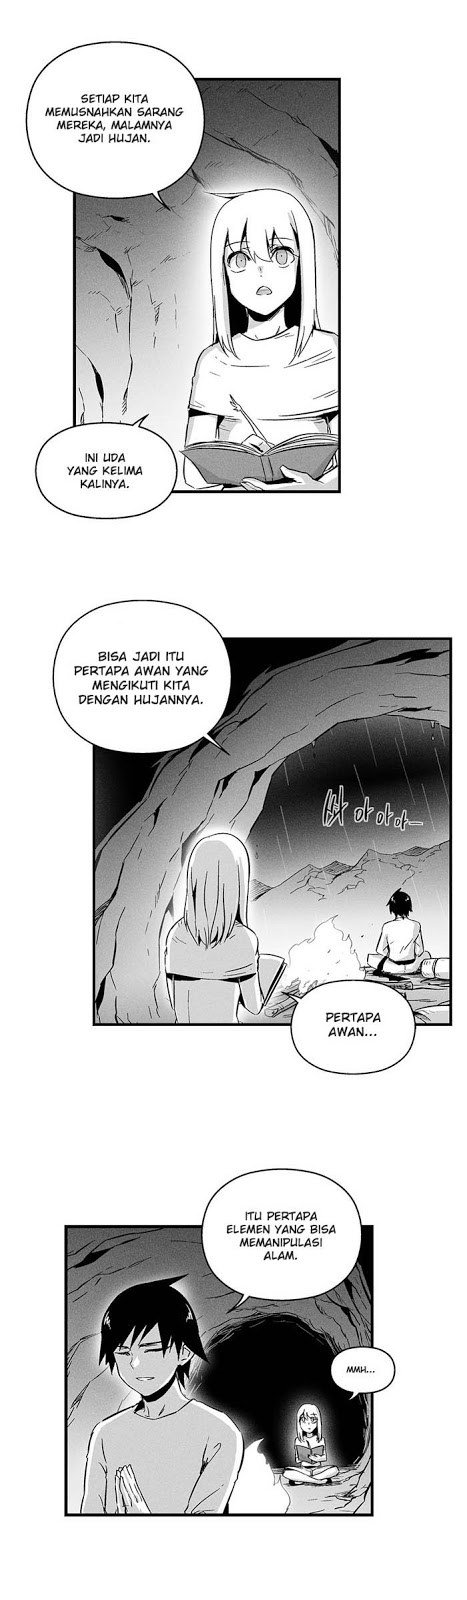 White Epic Chapter 09